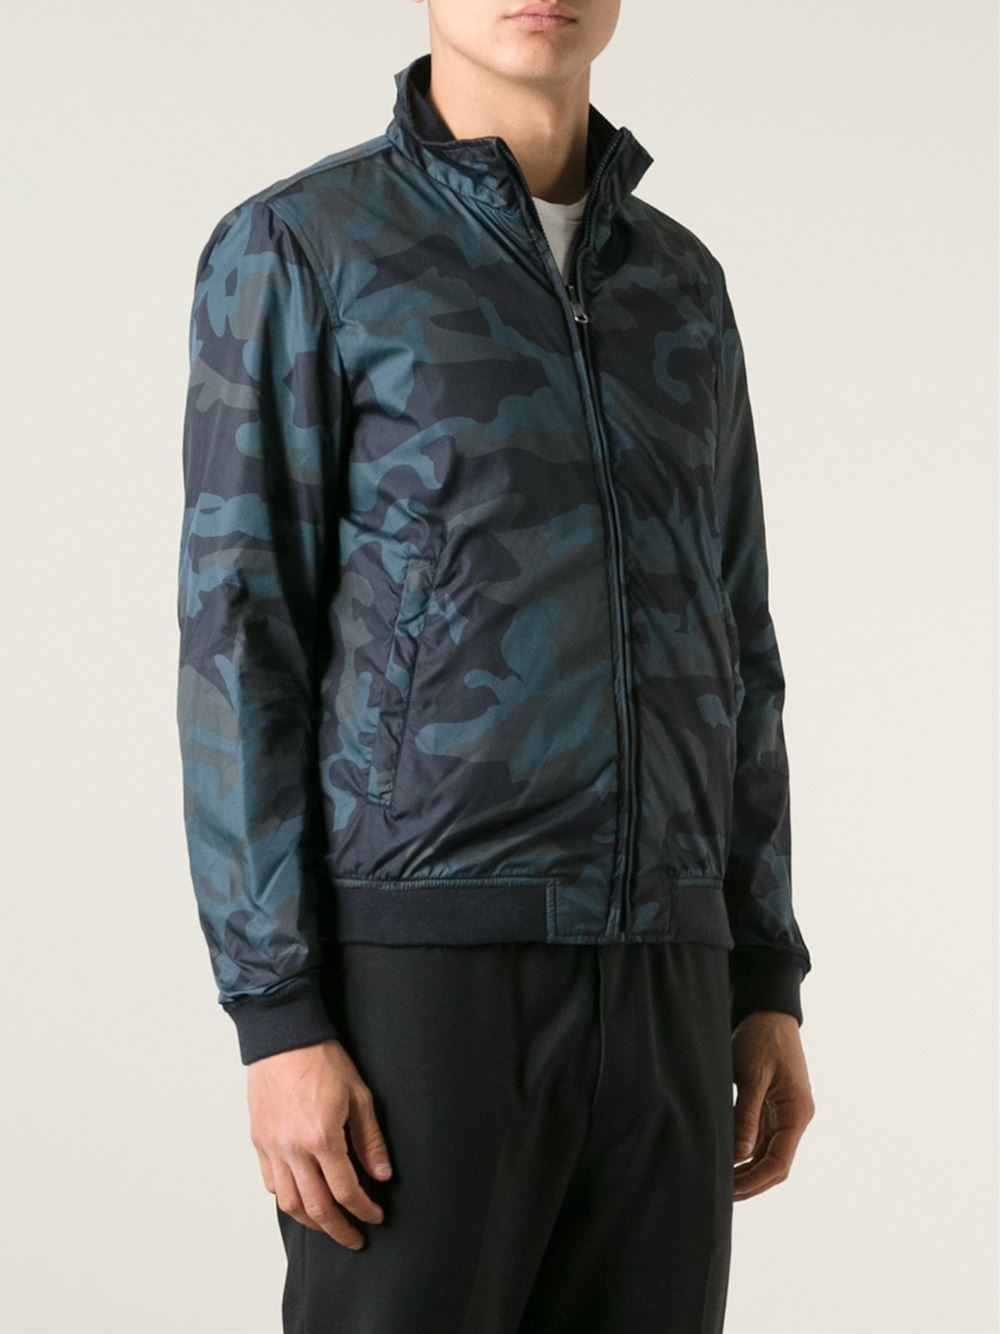 Woolrich Camouflage Print Reversible Jacket in Blue for Men - Lyst